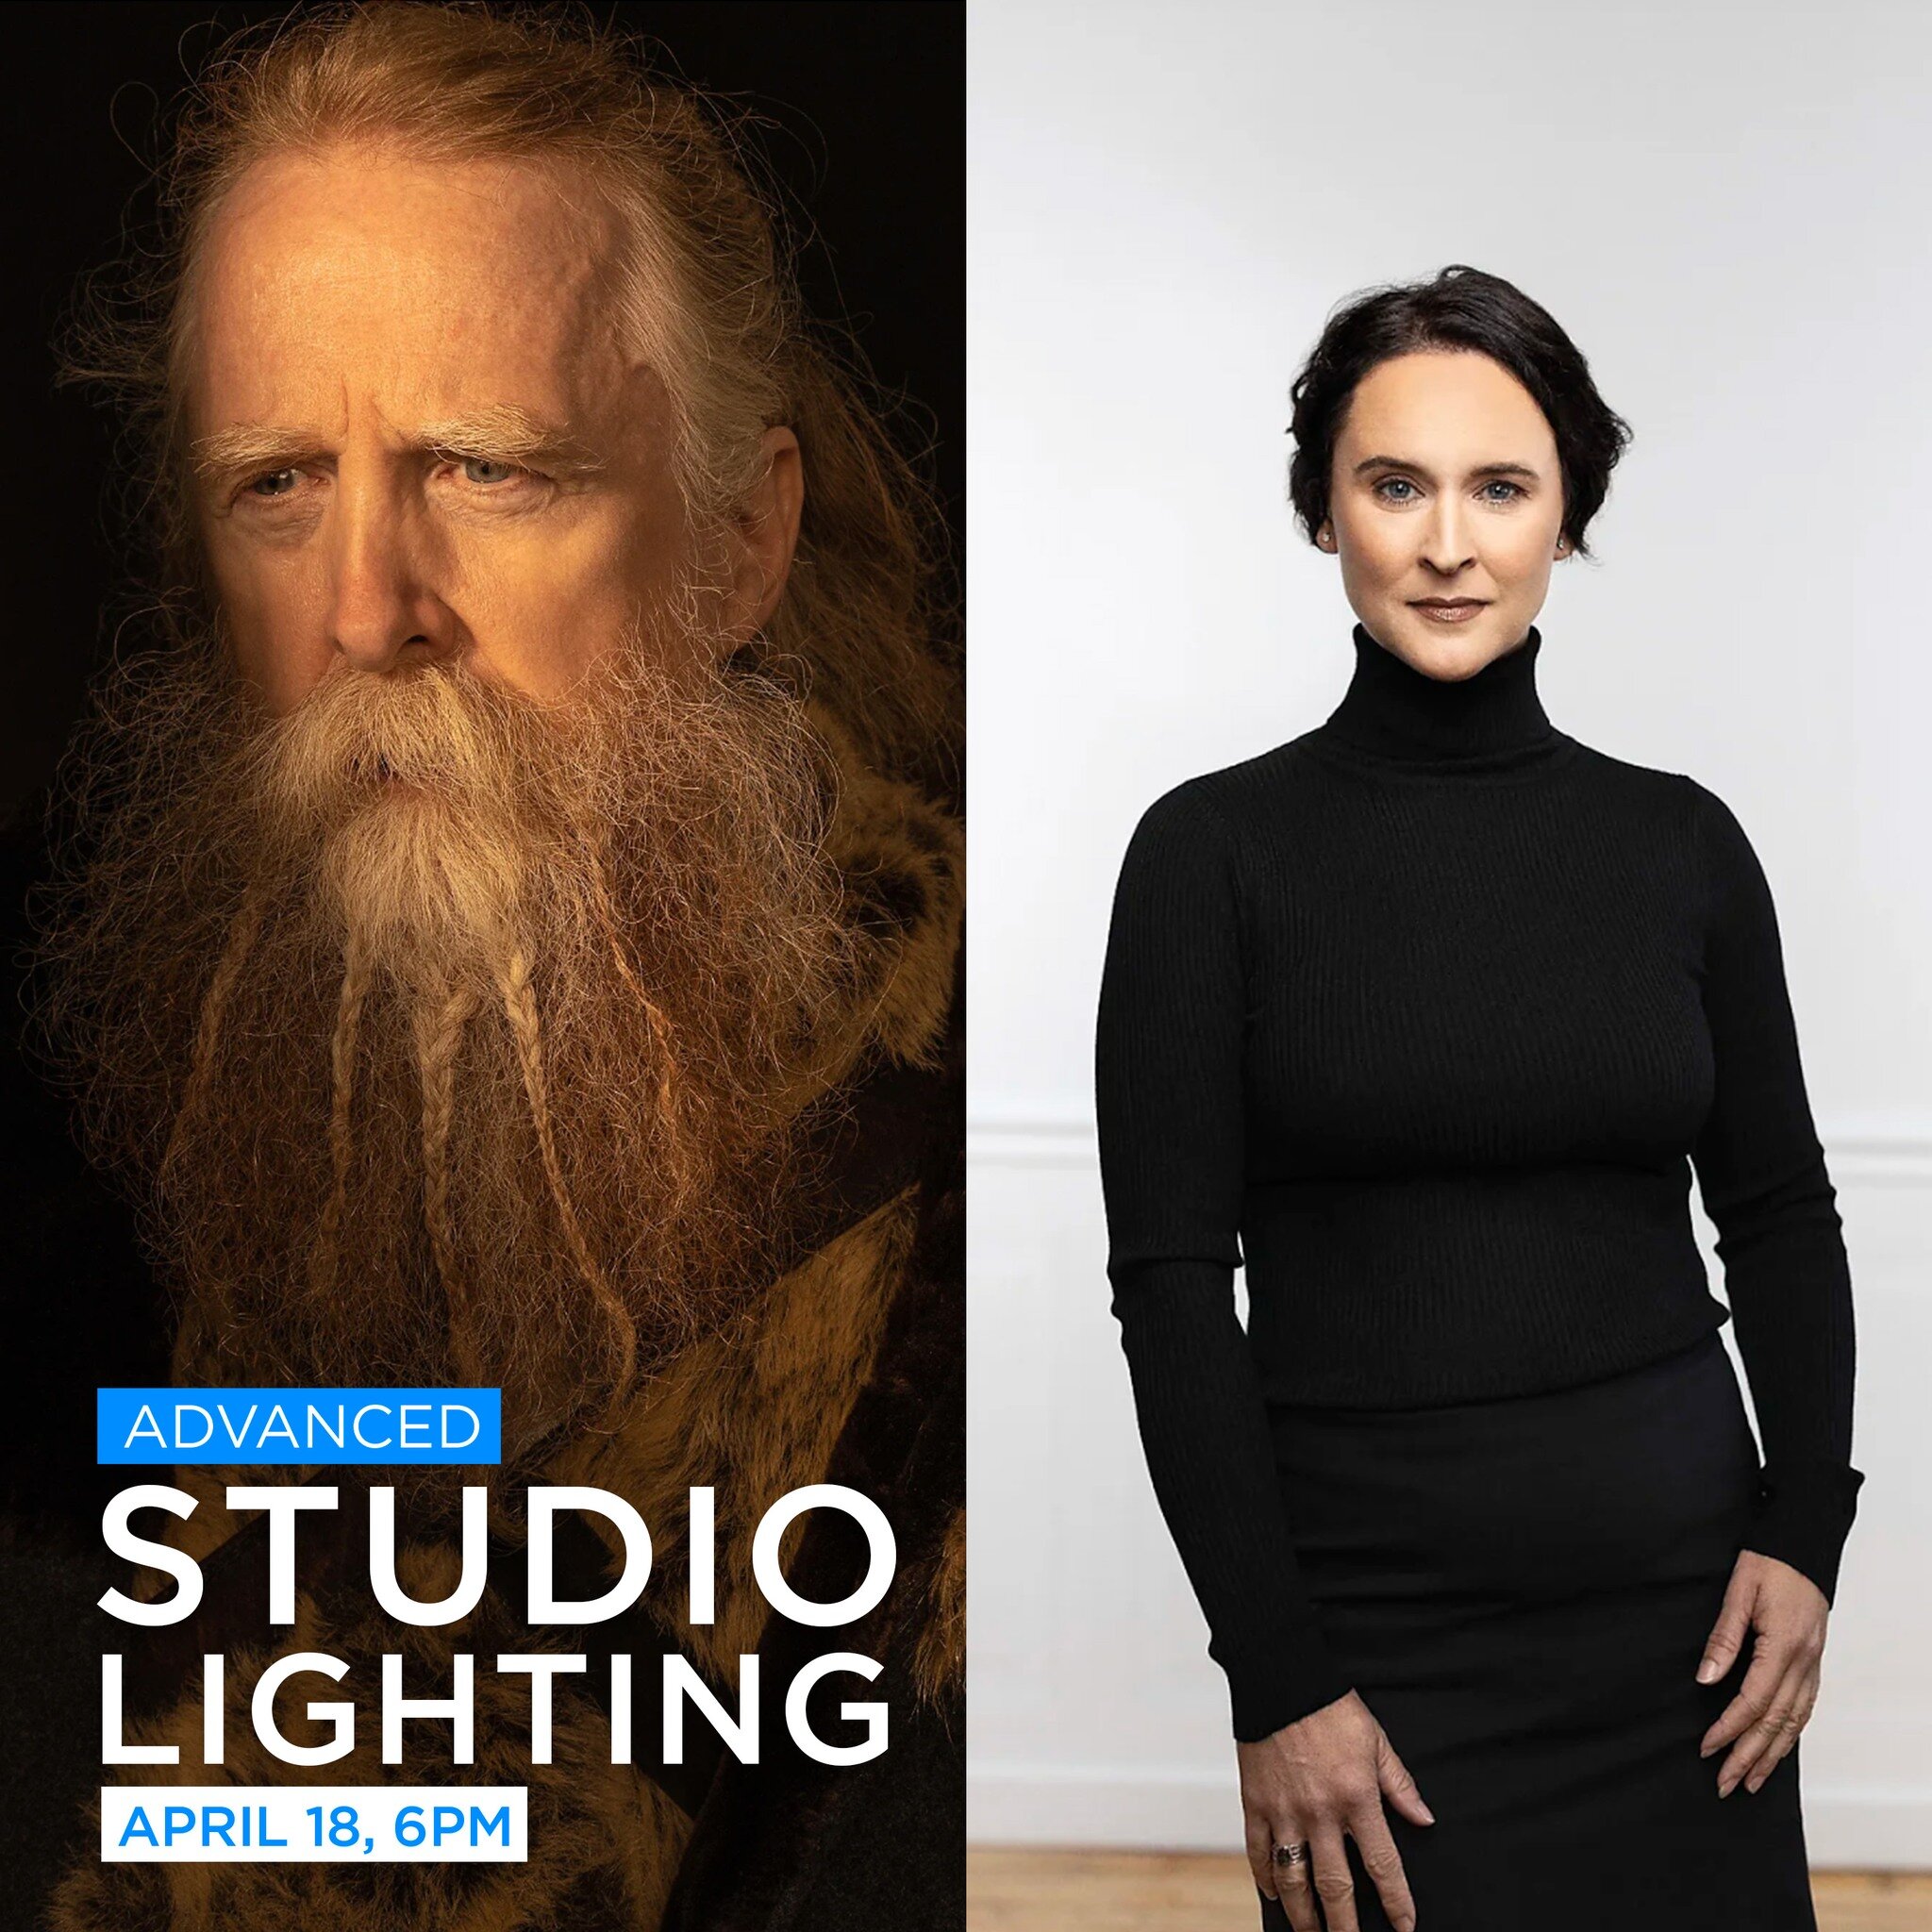 *****NEW CLASS ALERT*****
We are now offering Advanced Lighting! This class is designed around photographers that are comfortable with general studio lighting and want to learn more about layering and sculpting light on their subjects. It will build 